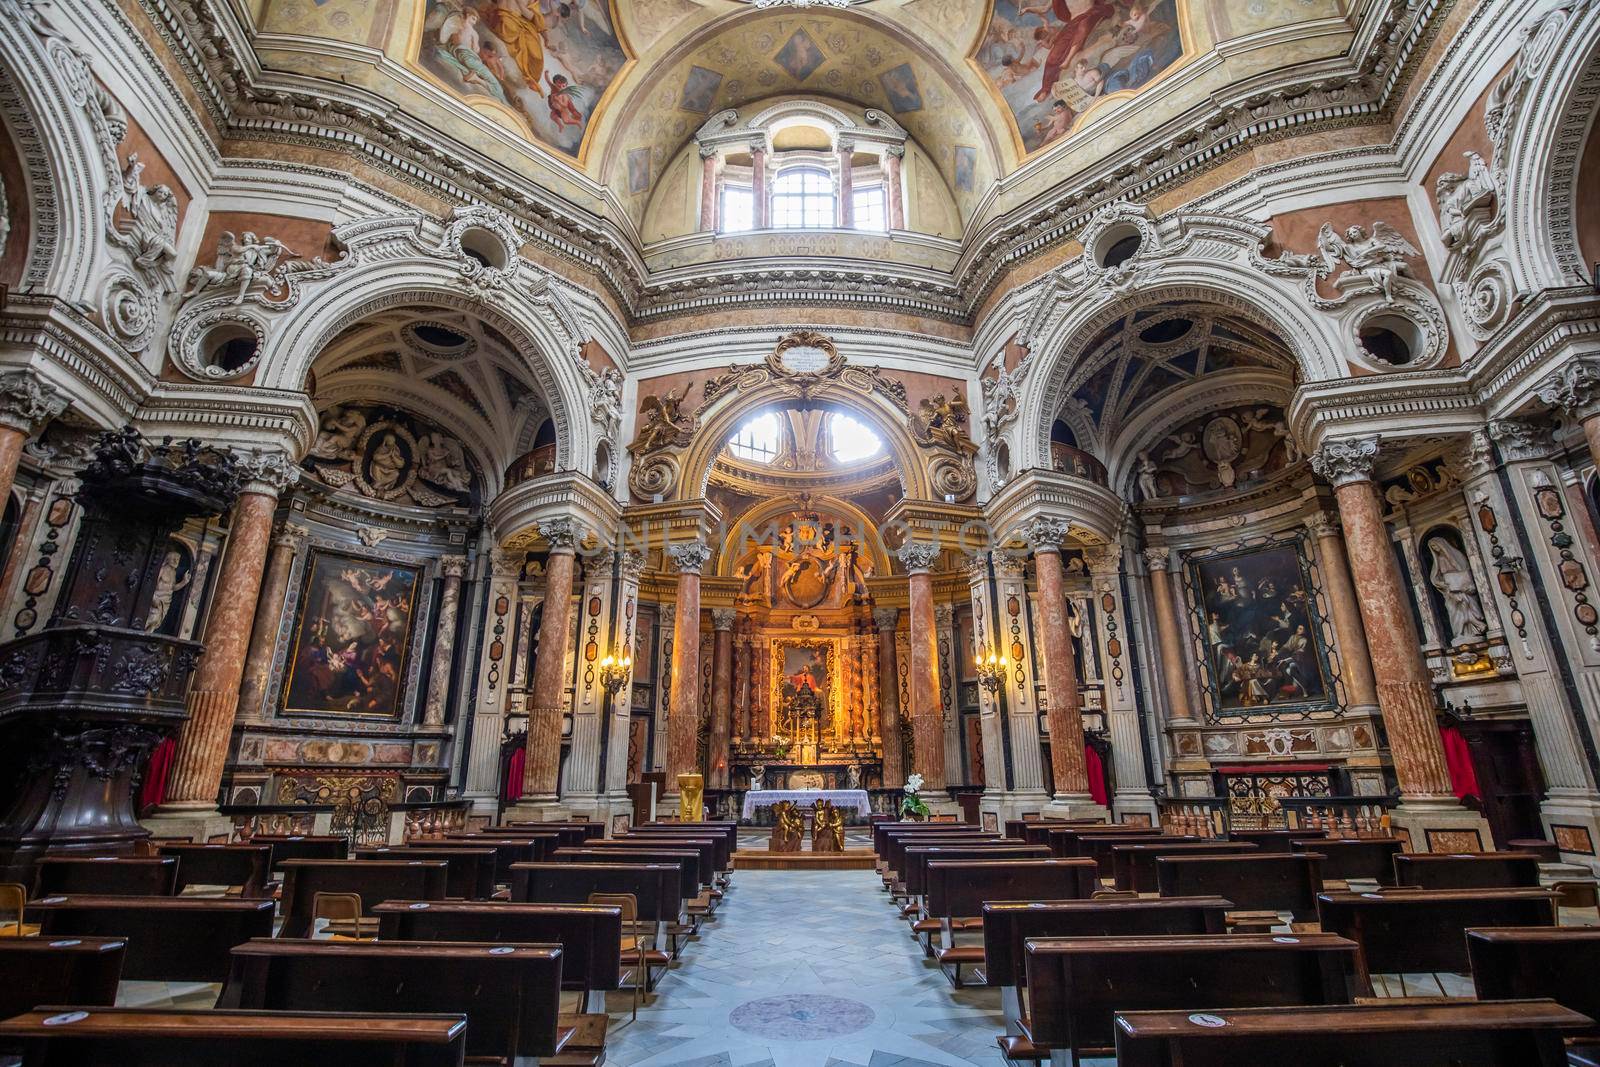 TURIN, ITALY - CIRCA MAY 2021: Antique baroque interior with vintage decoration. Royal Church of San Lorenzo (St. Lawrence).